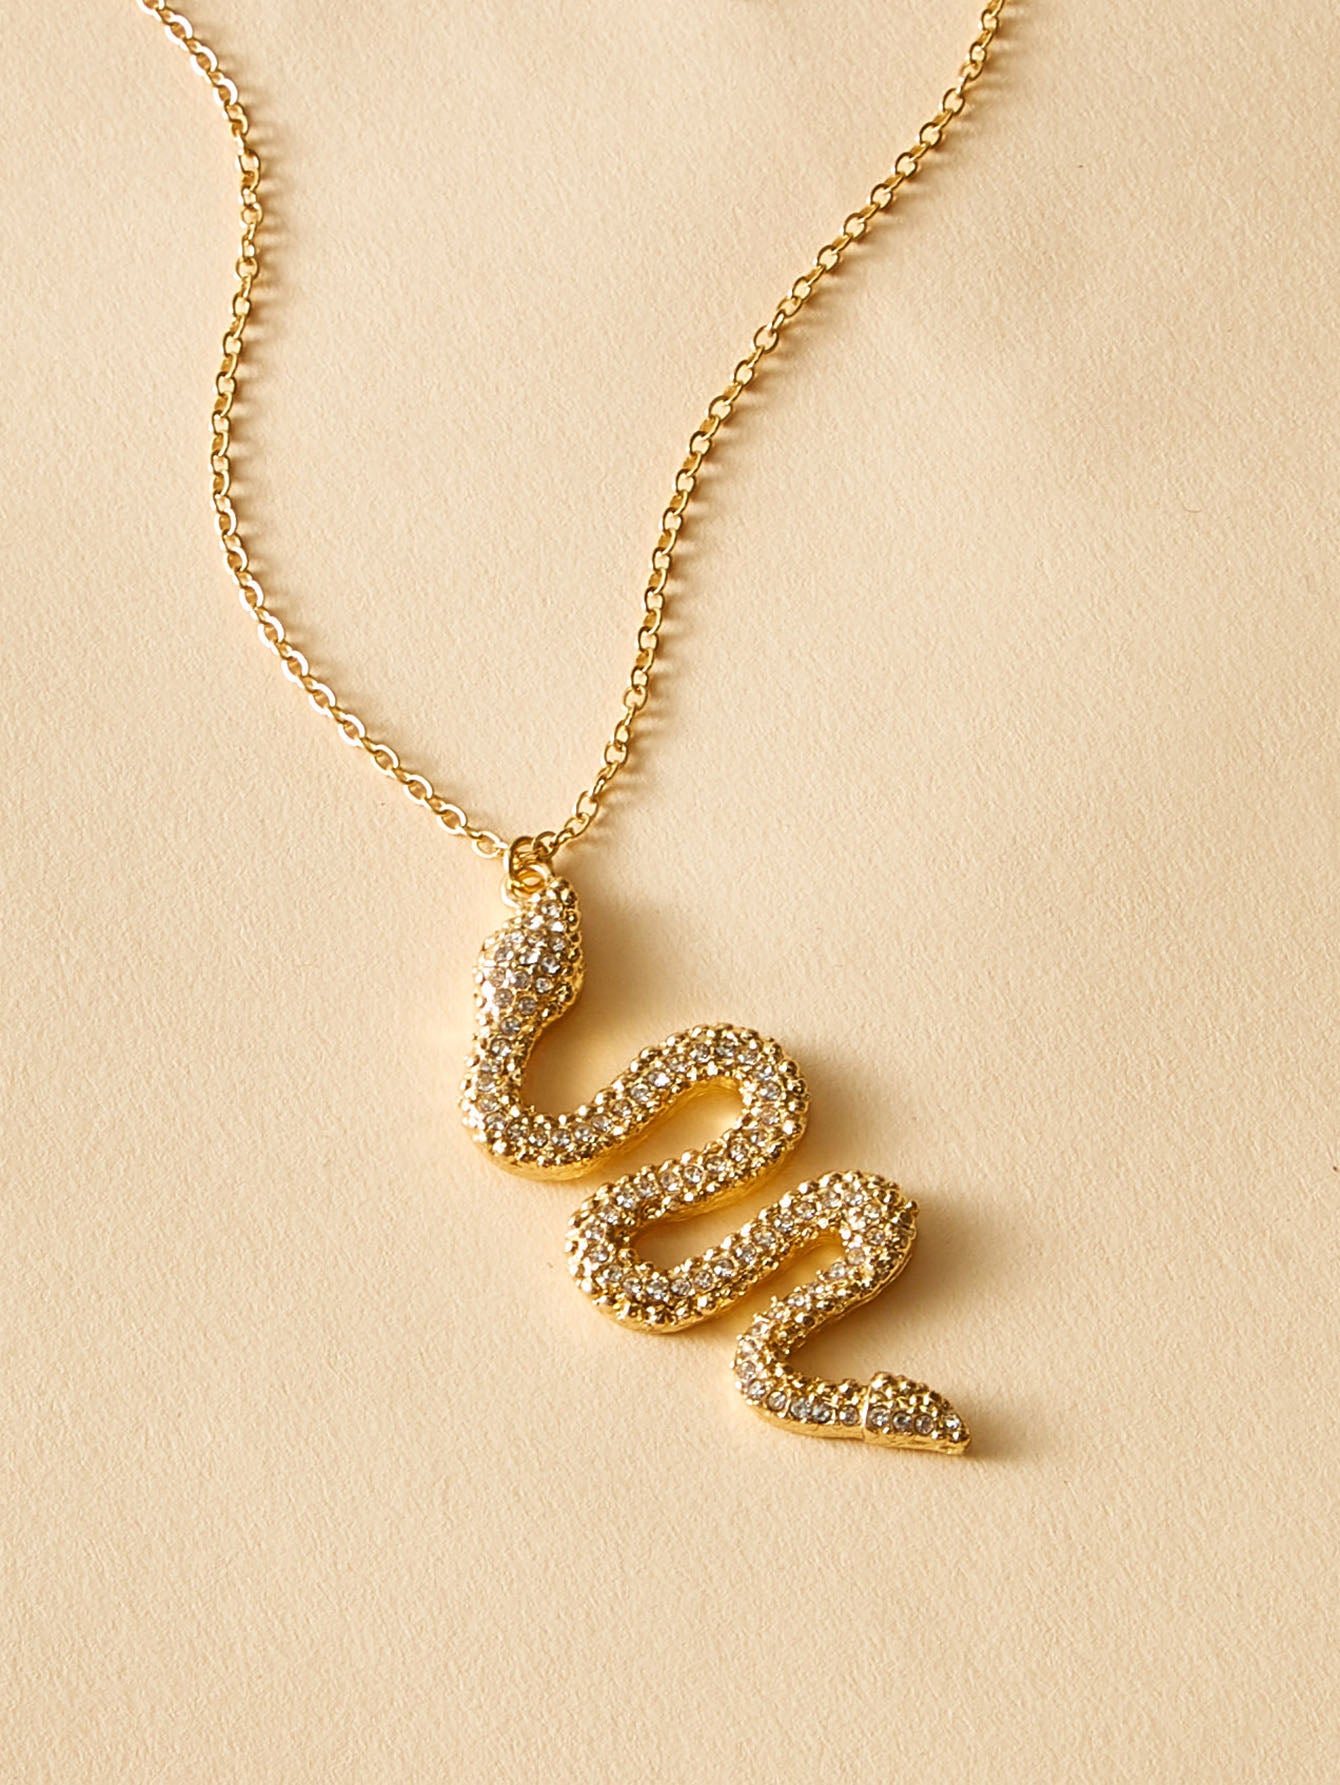 Snake Charm Necklace (Gold) - YOUAREMYPOISON